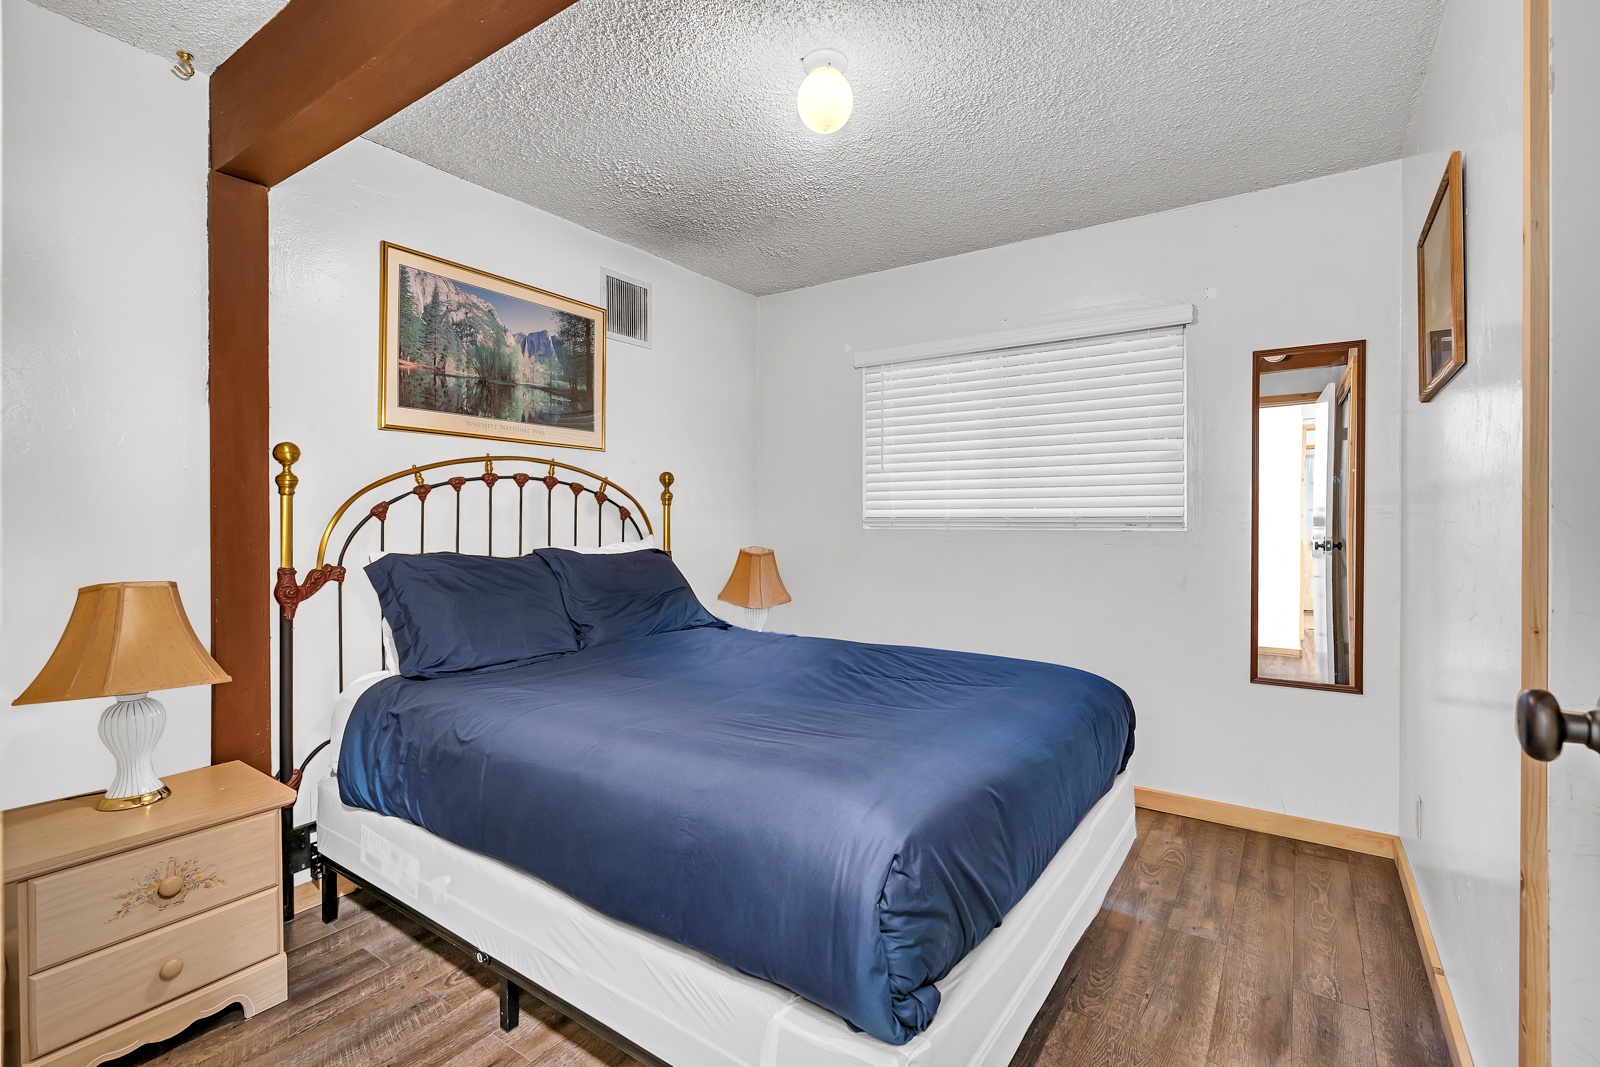 The second bedroom offers a regal queen-sized bed